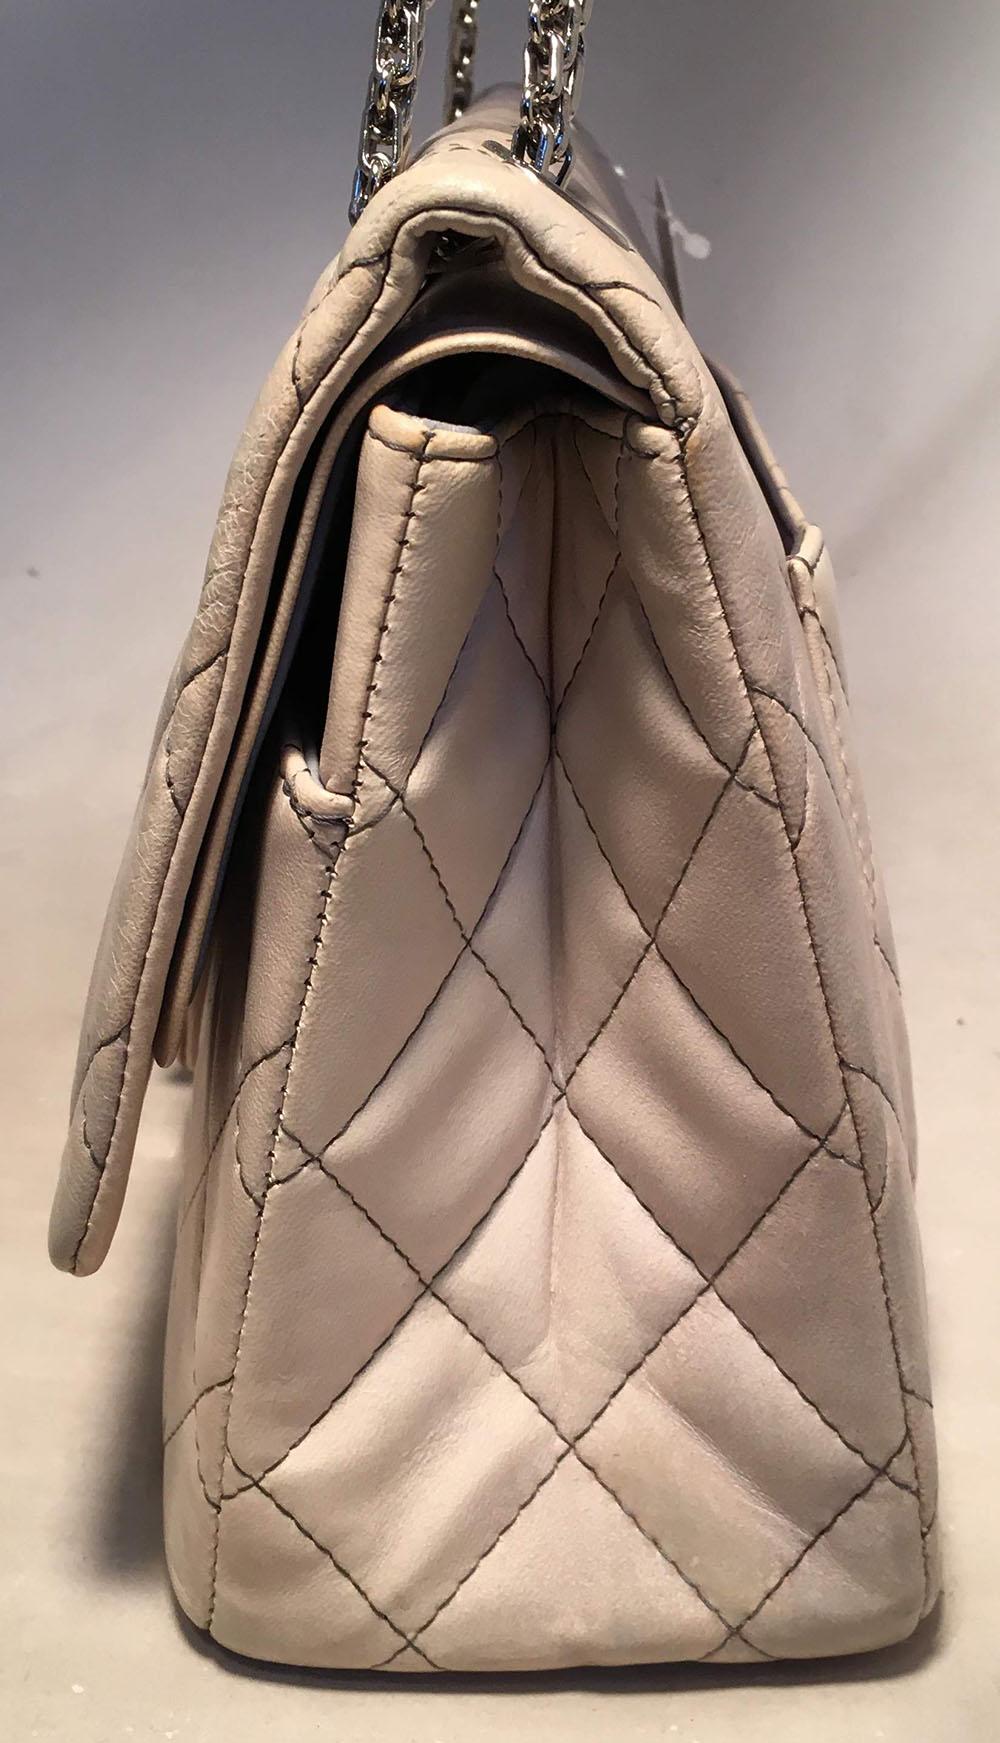 BEAUTIFUL CHANEL Degrade Ombre Grey Quilted Leather 2.55 Reissue 227 Classic Flap Bag in excellent condition. Grey and cream quilted lambskin leather exterior in a unique ombre effect and is trimmed with silver hardware. Mademoiselle style twist